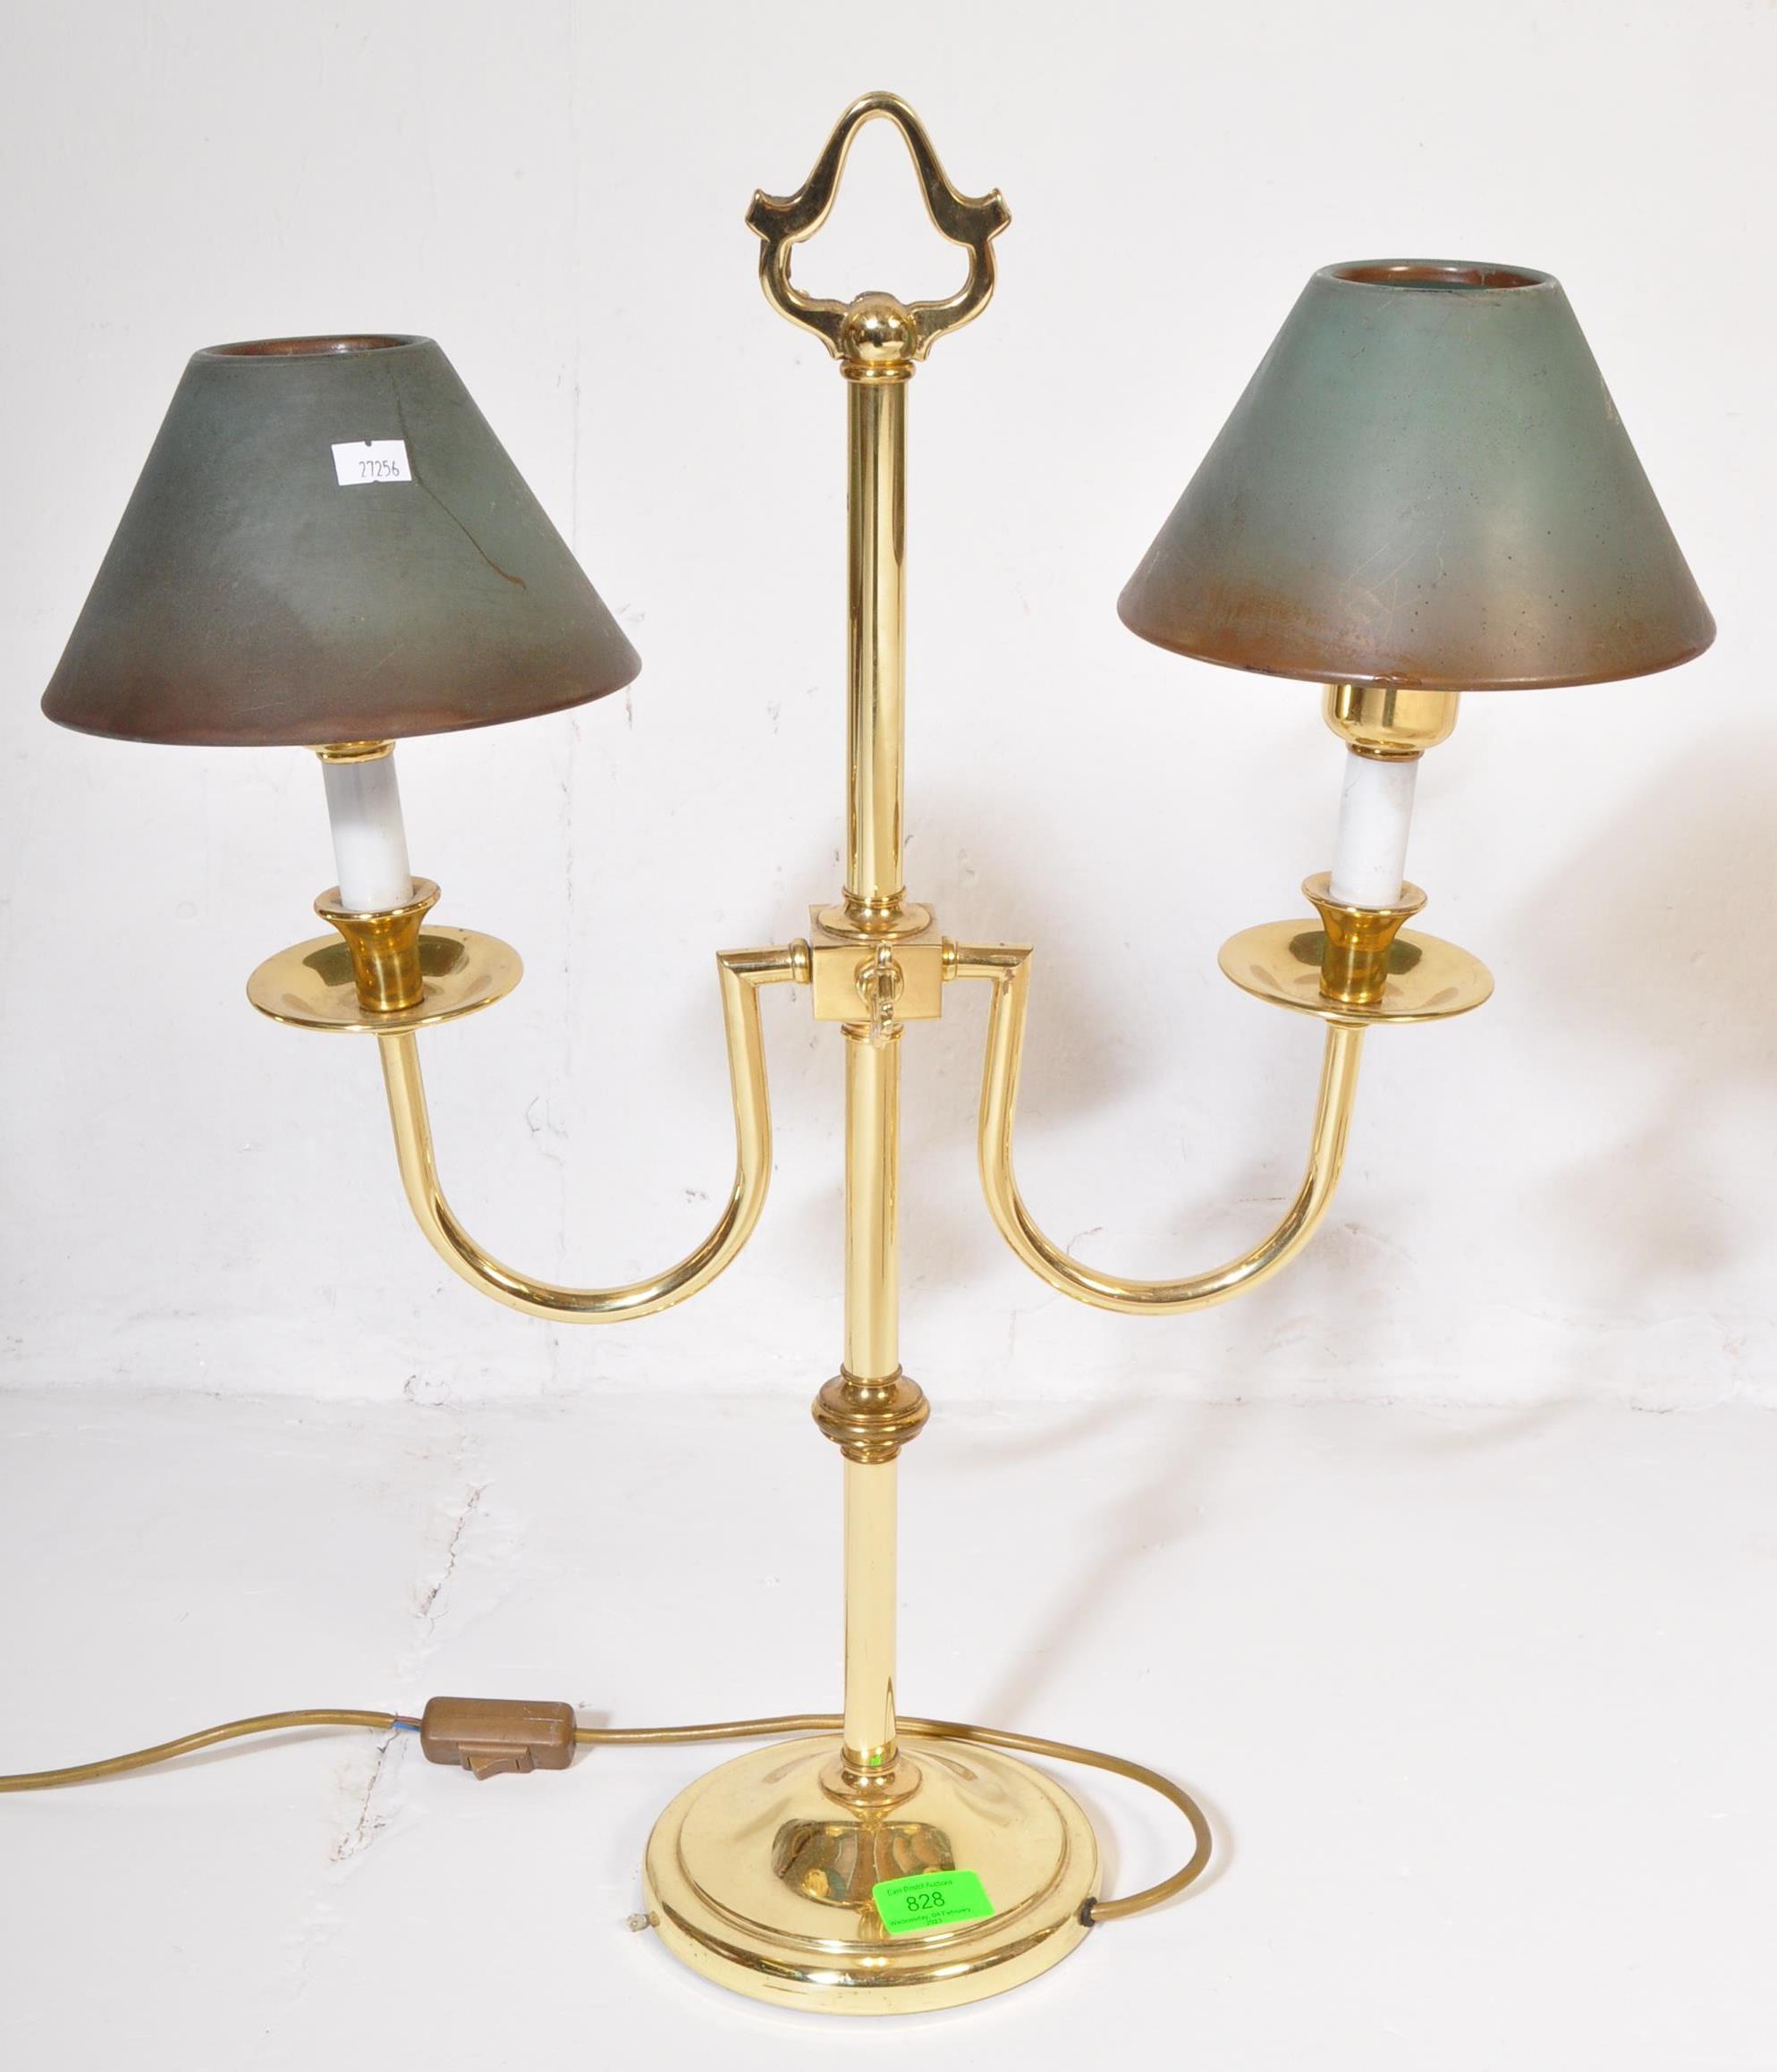 PAIR OF RETRO VINTAGE GILT METAL CASINO TABLE LAMPS - Image 5 of 5